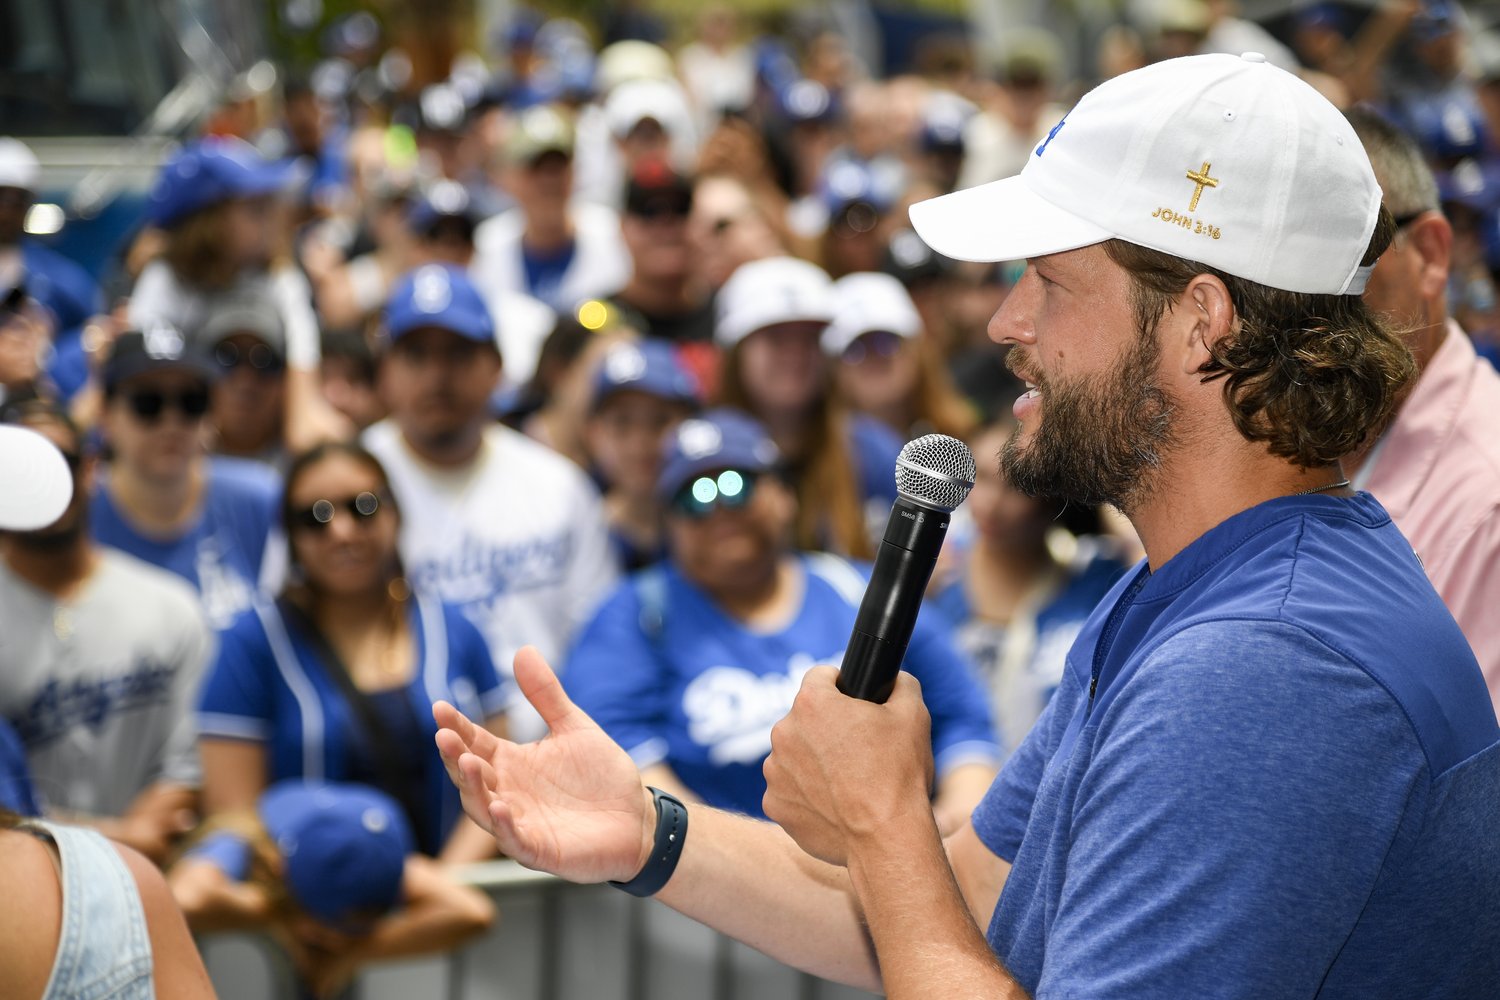 ⚾️ New biography gives insight into star pitcher Clayton
Kershaw’s faith 🔌